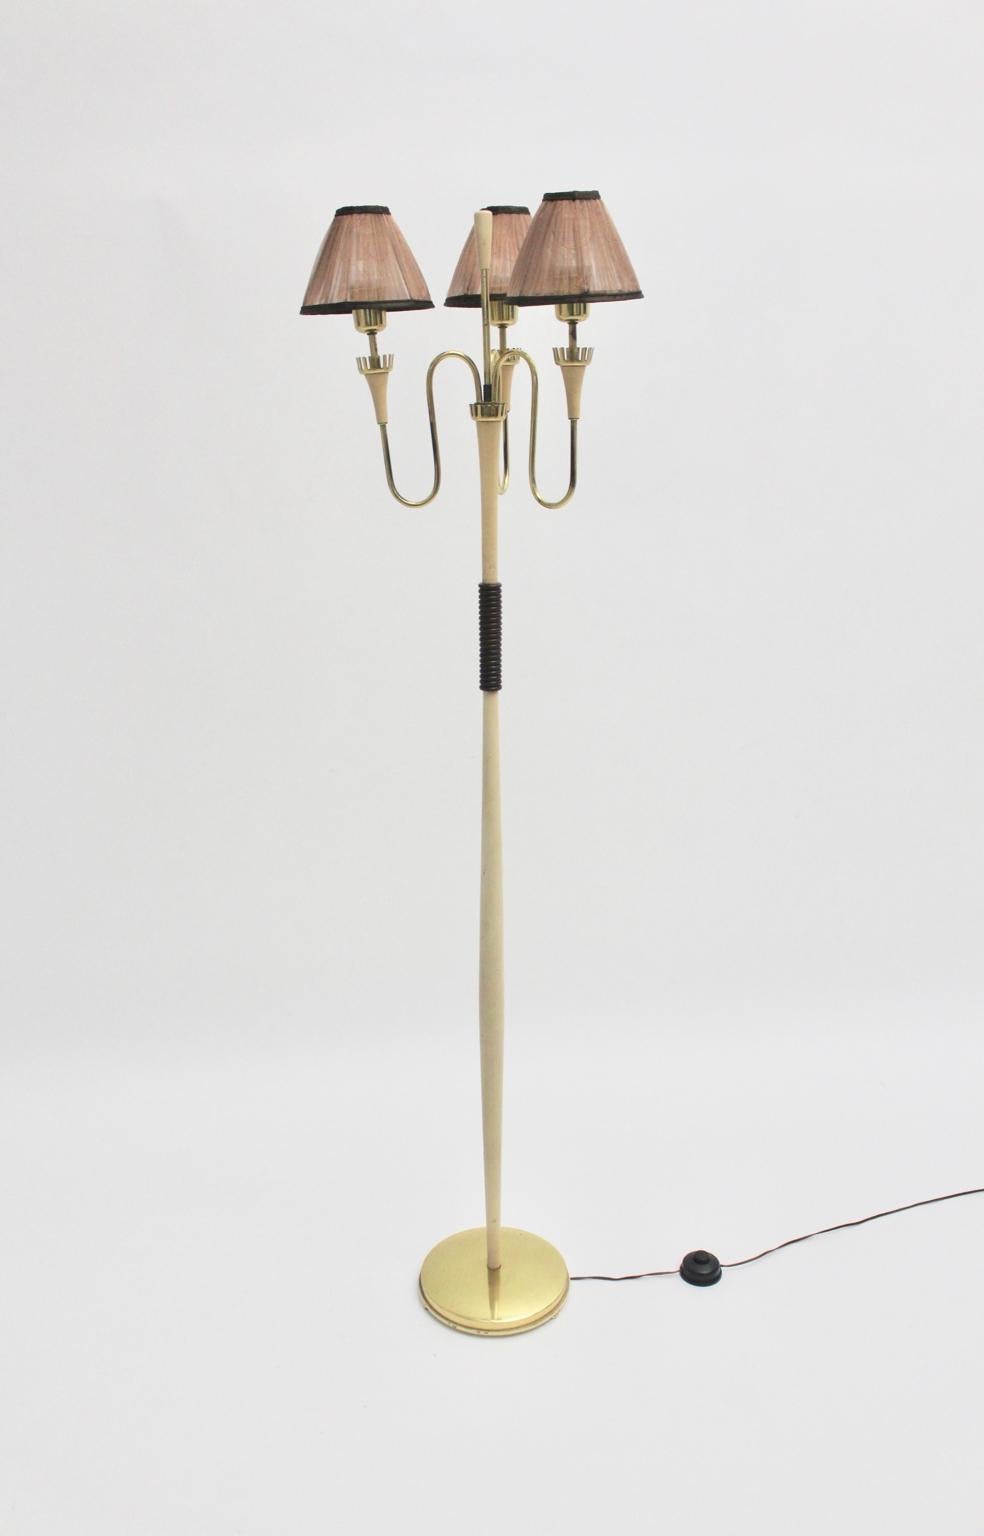 Mid century modern brass vintage floor lamp from white lacquered wood and brass style Gio Ponti 
and Pietro Chiesa 1940s in Italy. 
An elegant and gorgeous floor lamp in the style of Gio Ponti and Pietro Chiesa shows three brassed slightly curved